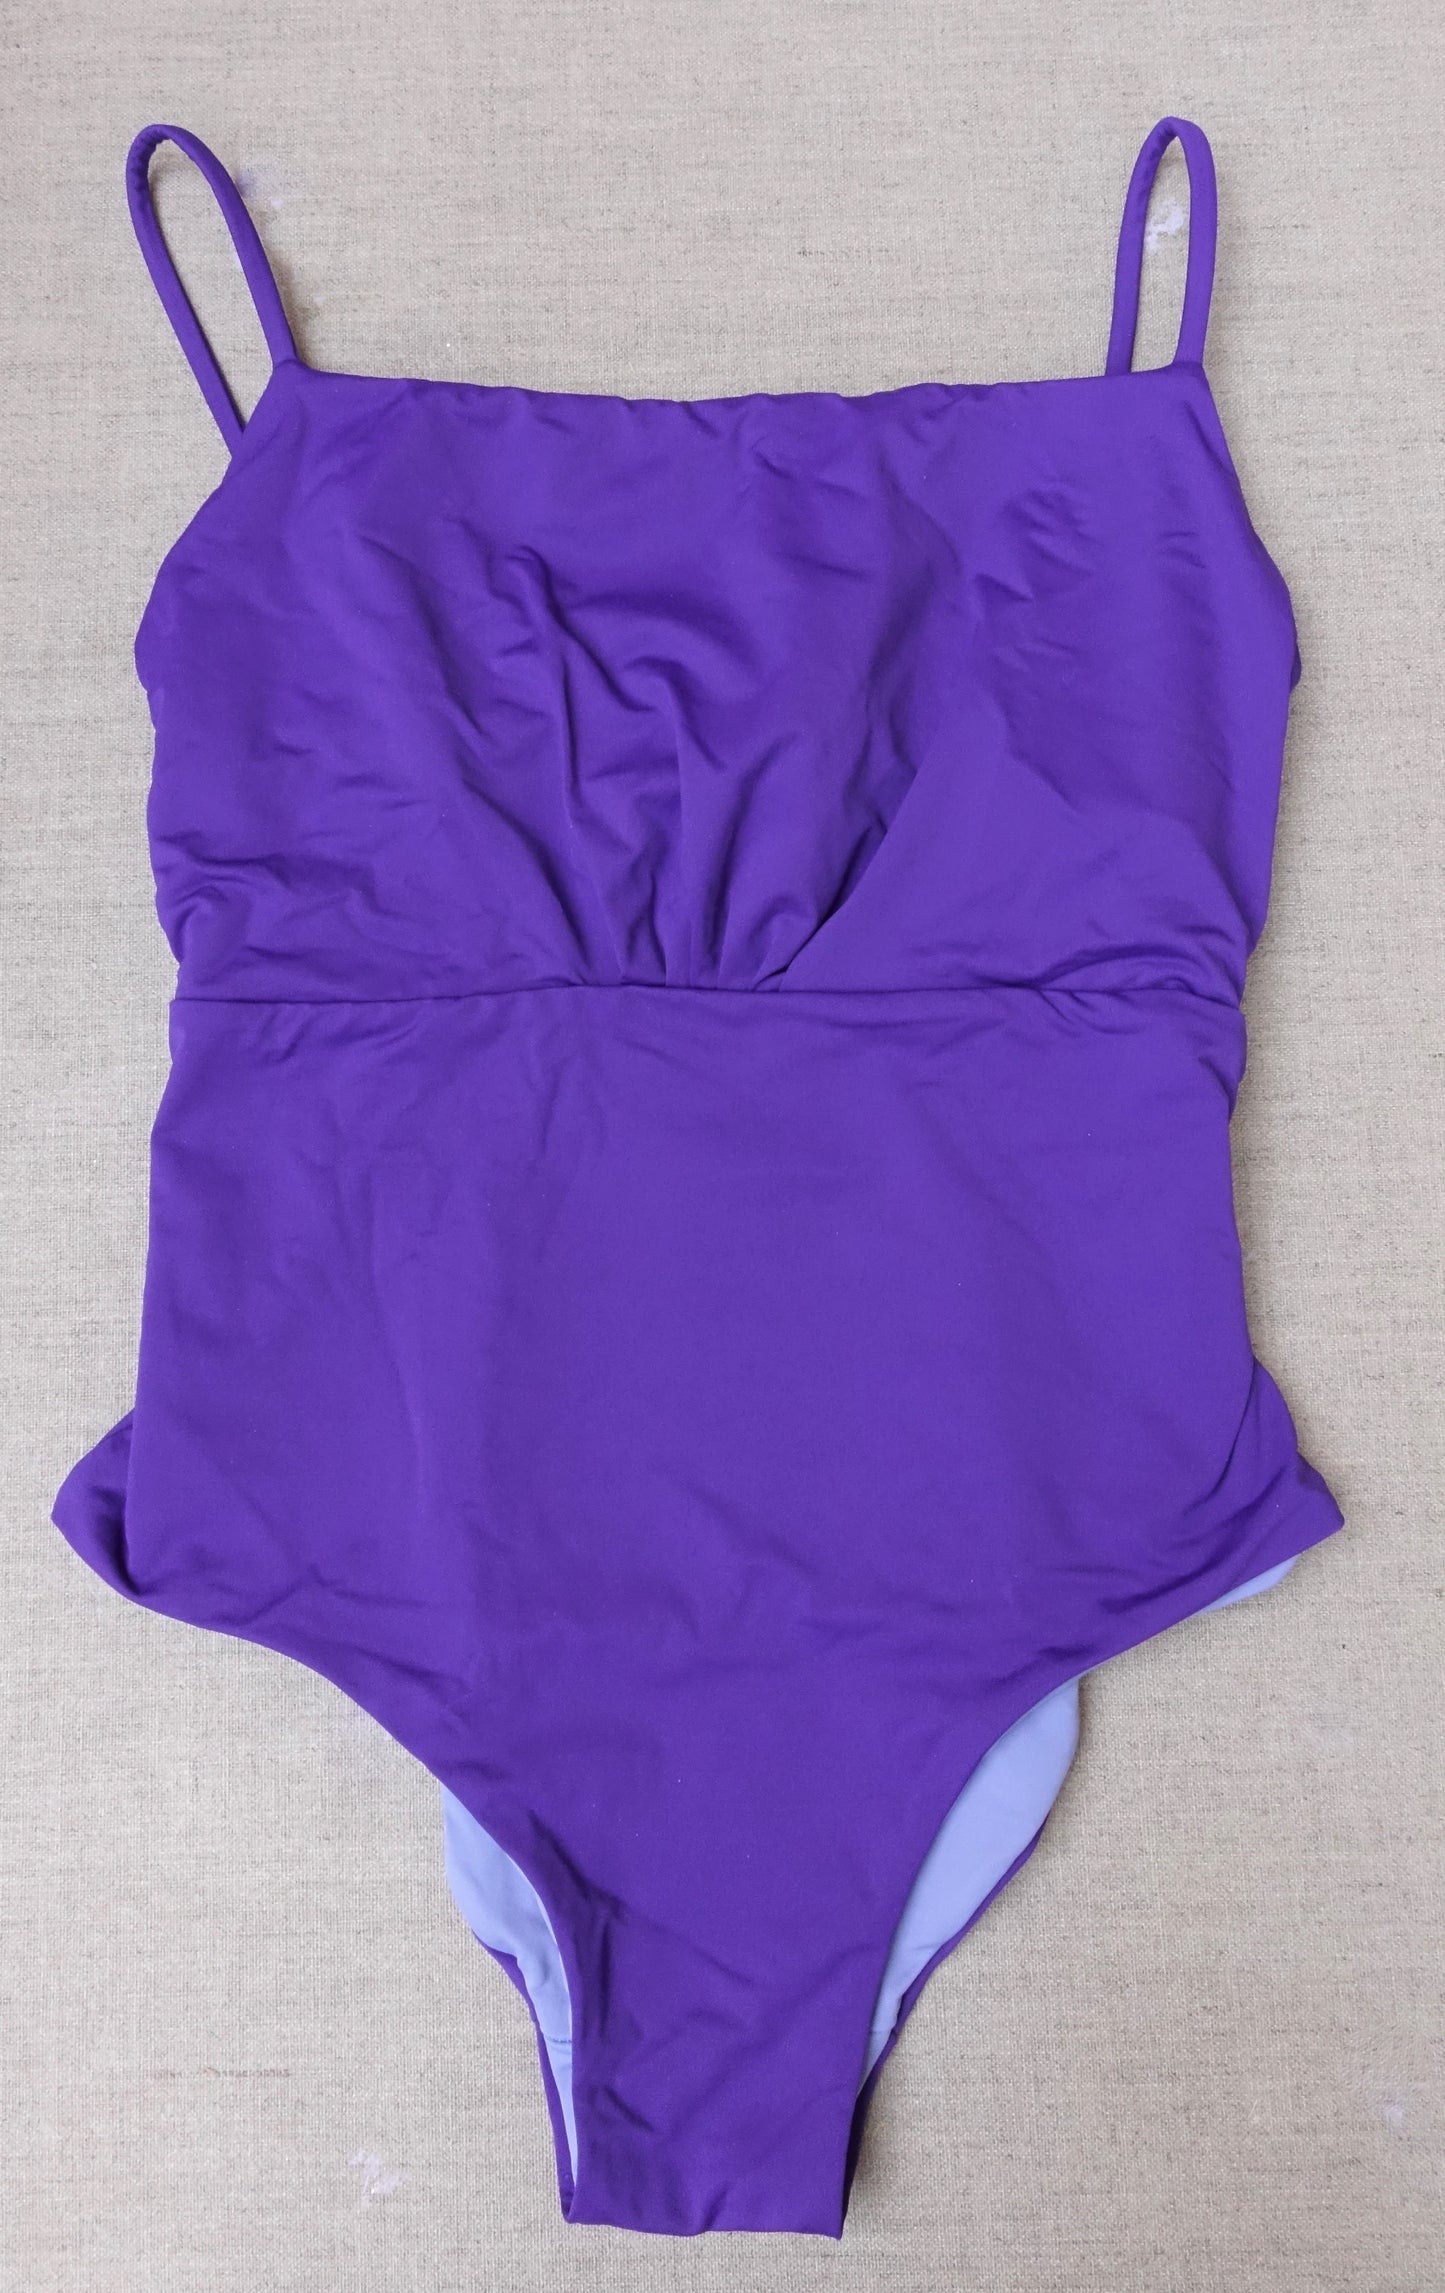 Purple and light blue "Shirley" one-piece swimsuit